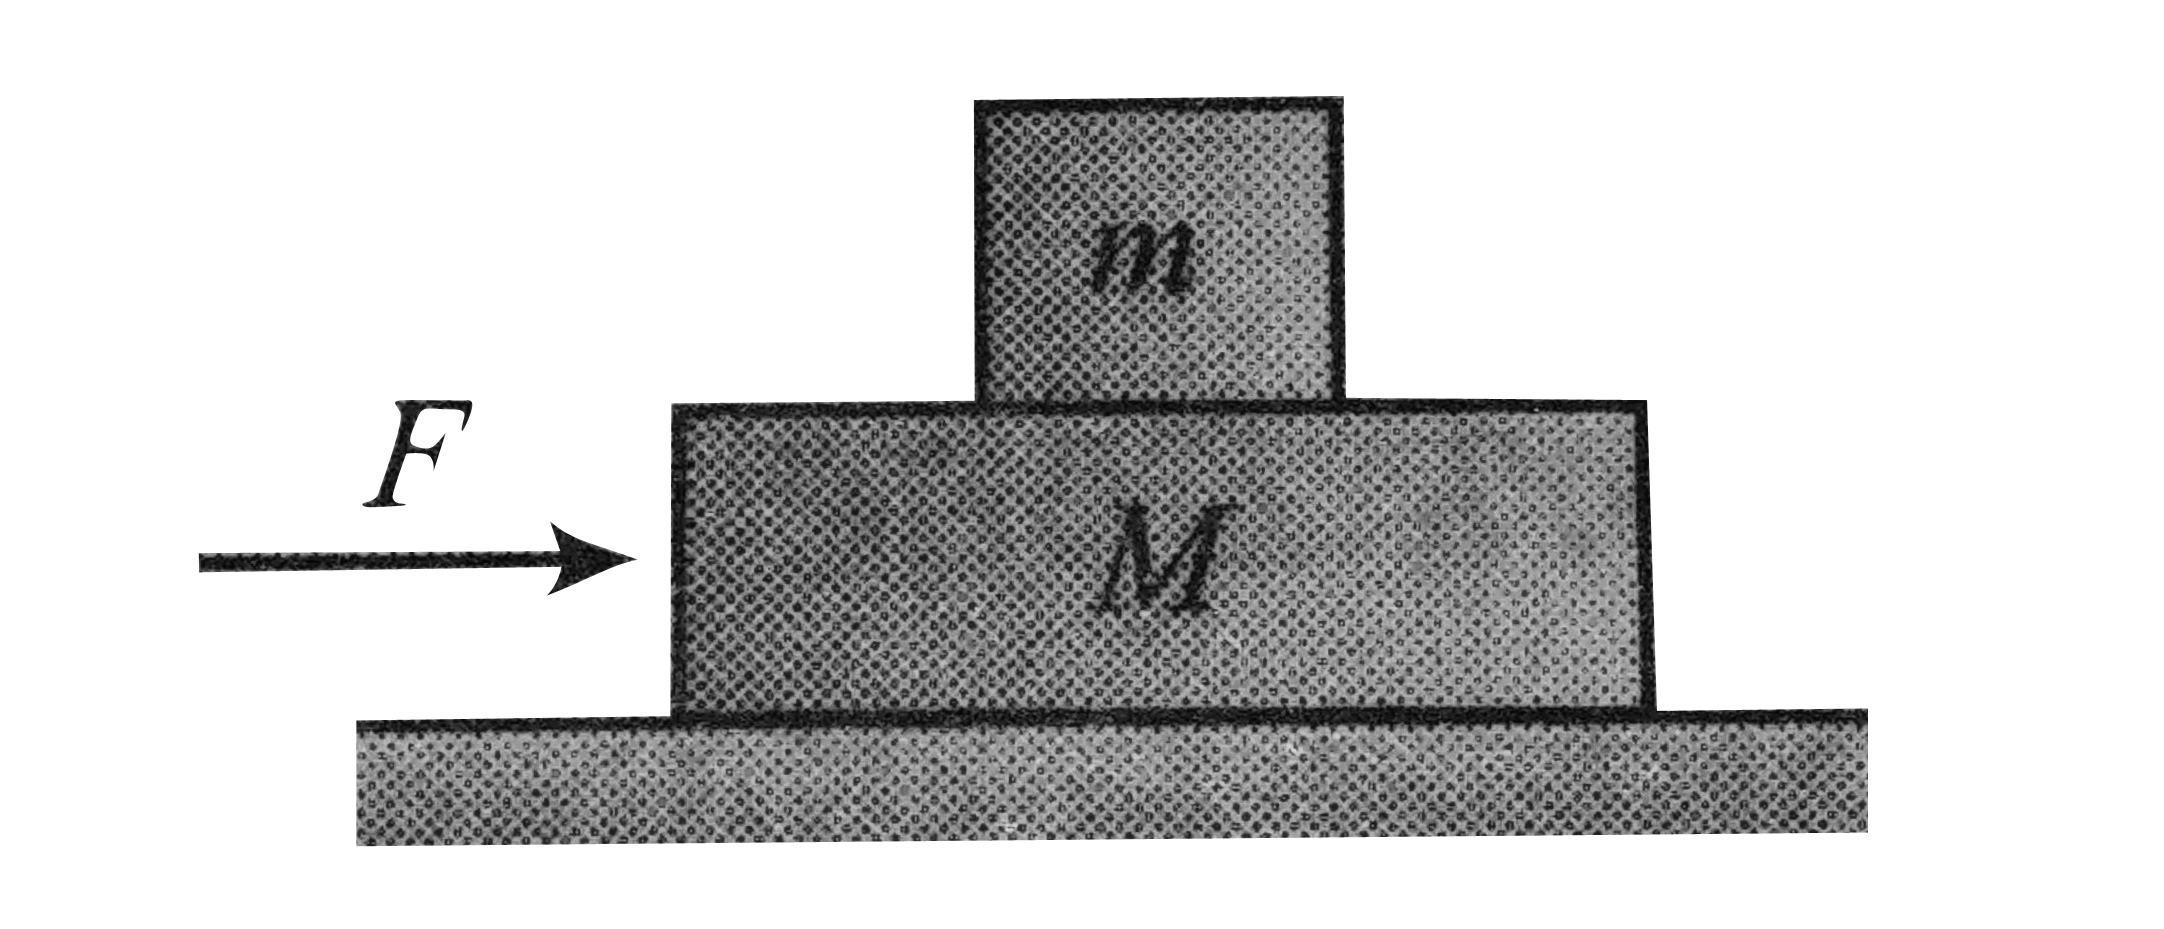 A block of mass m is placed on the block of mass M as shown in figure. The horizontal force vecF acts on M during time interval t. If the horizontal surface is smooth, assuming no relative sliding between the blocks, find the   a. work done by friction on the blocks   b. work done by vecF on the lower block